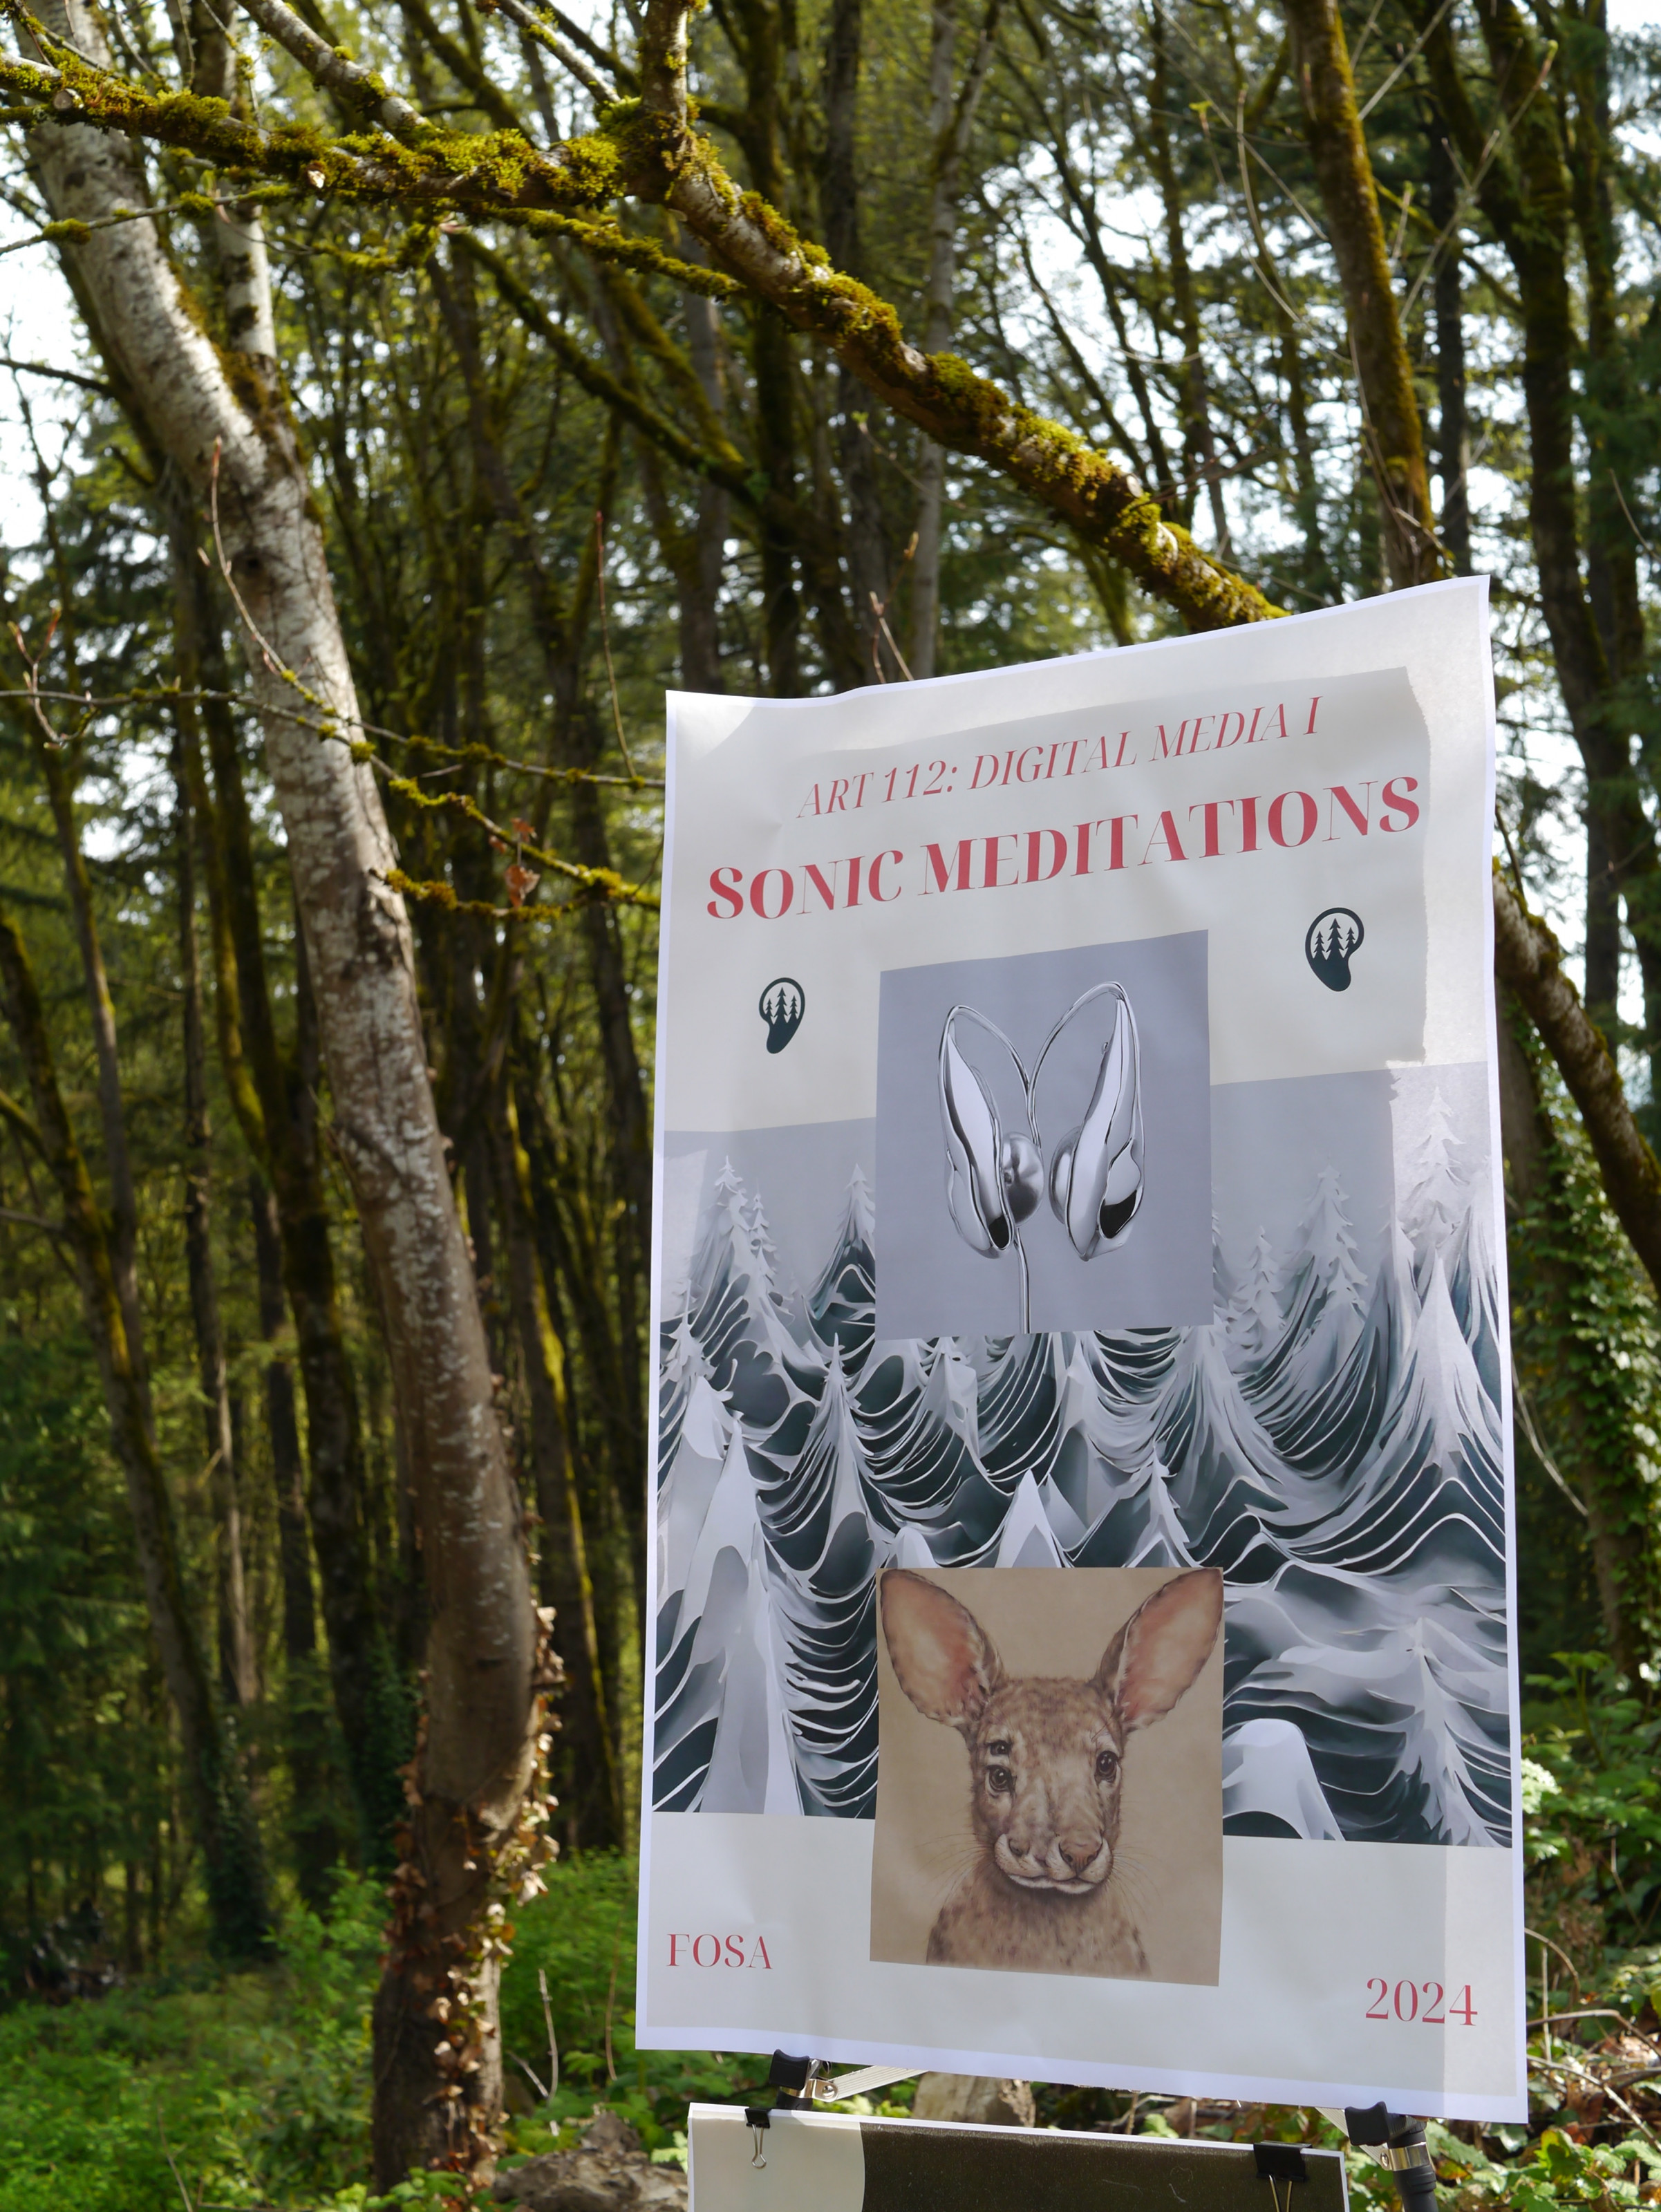 Poster for Sonic Meditations work in a forest.